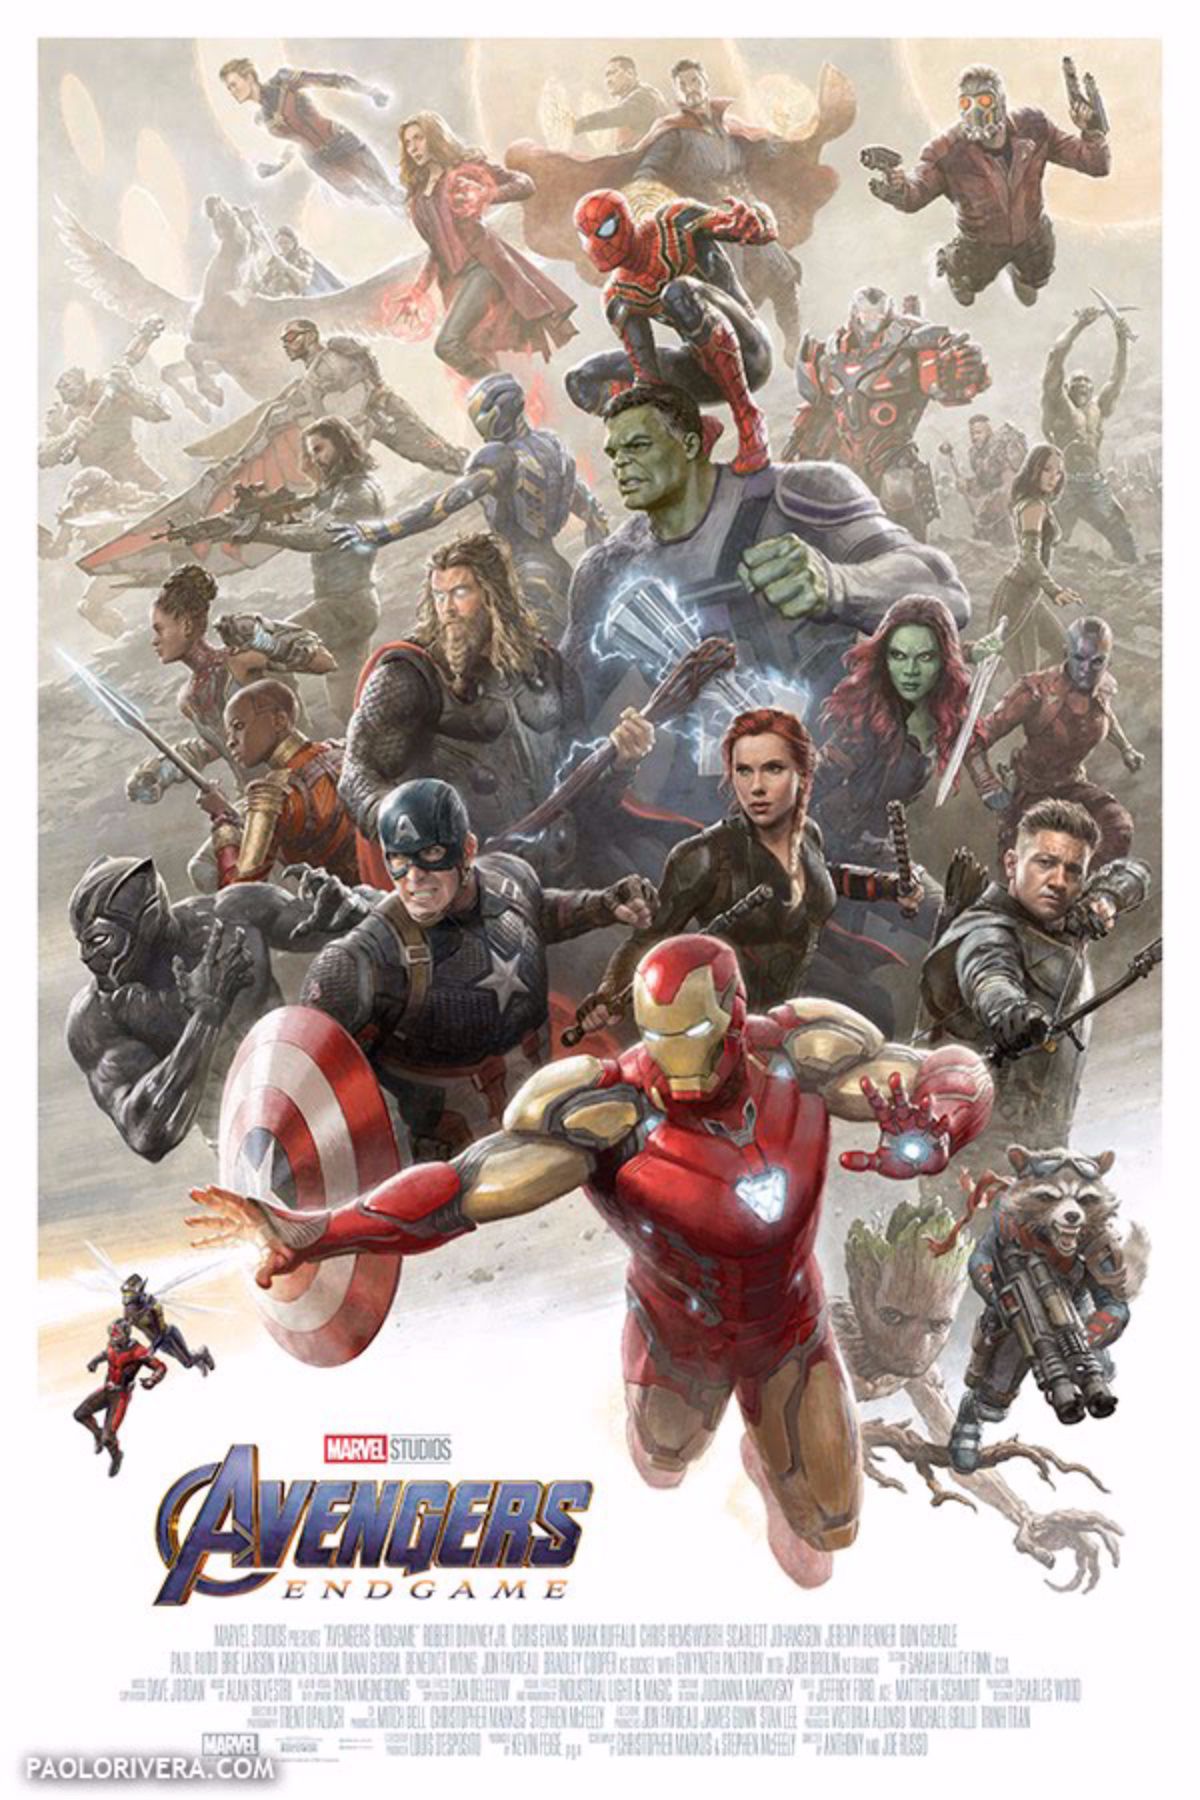 Avengers Endgame Cast and Crew Poster